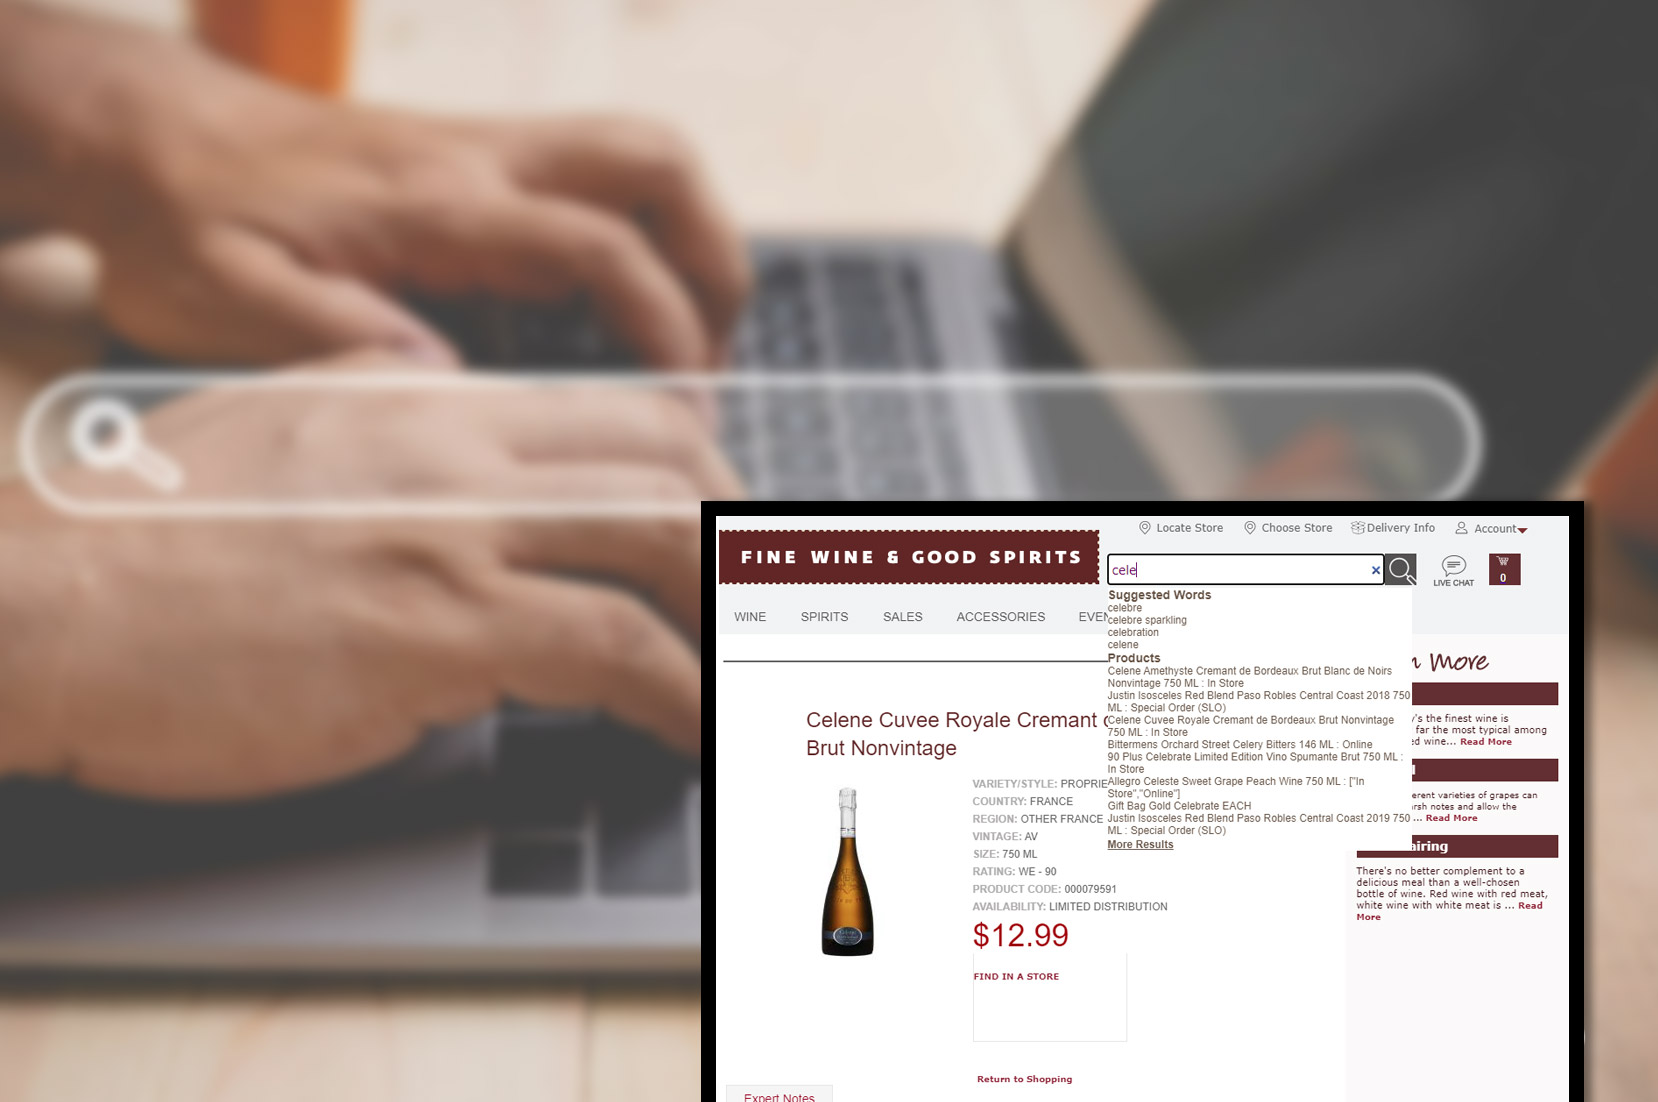 finewineandgoodspirits-comproduct-categories-keywords-and-brand-scraping-services